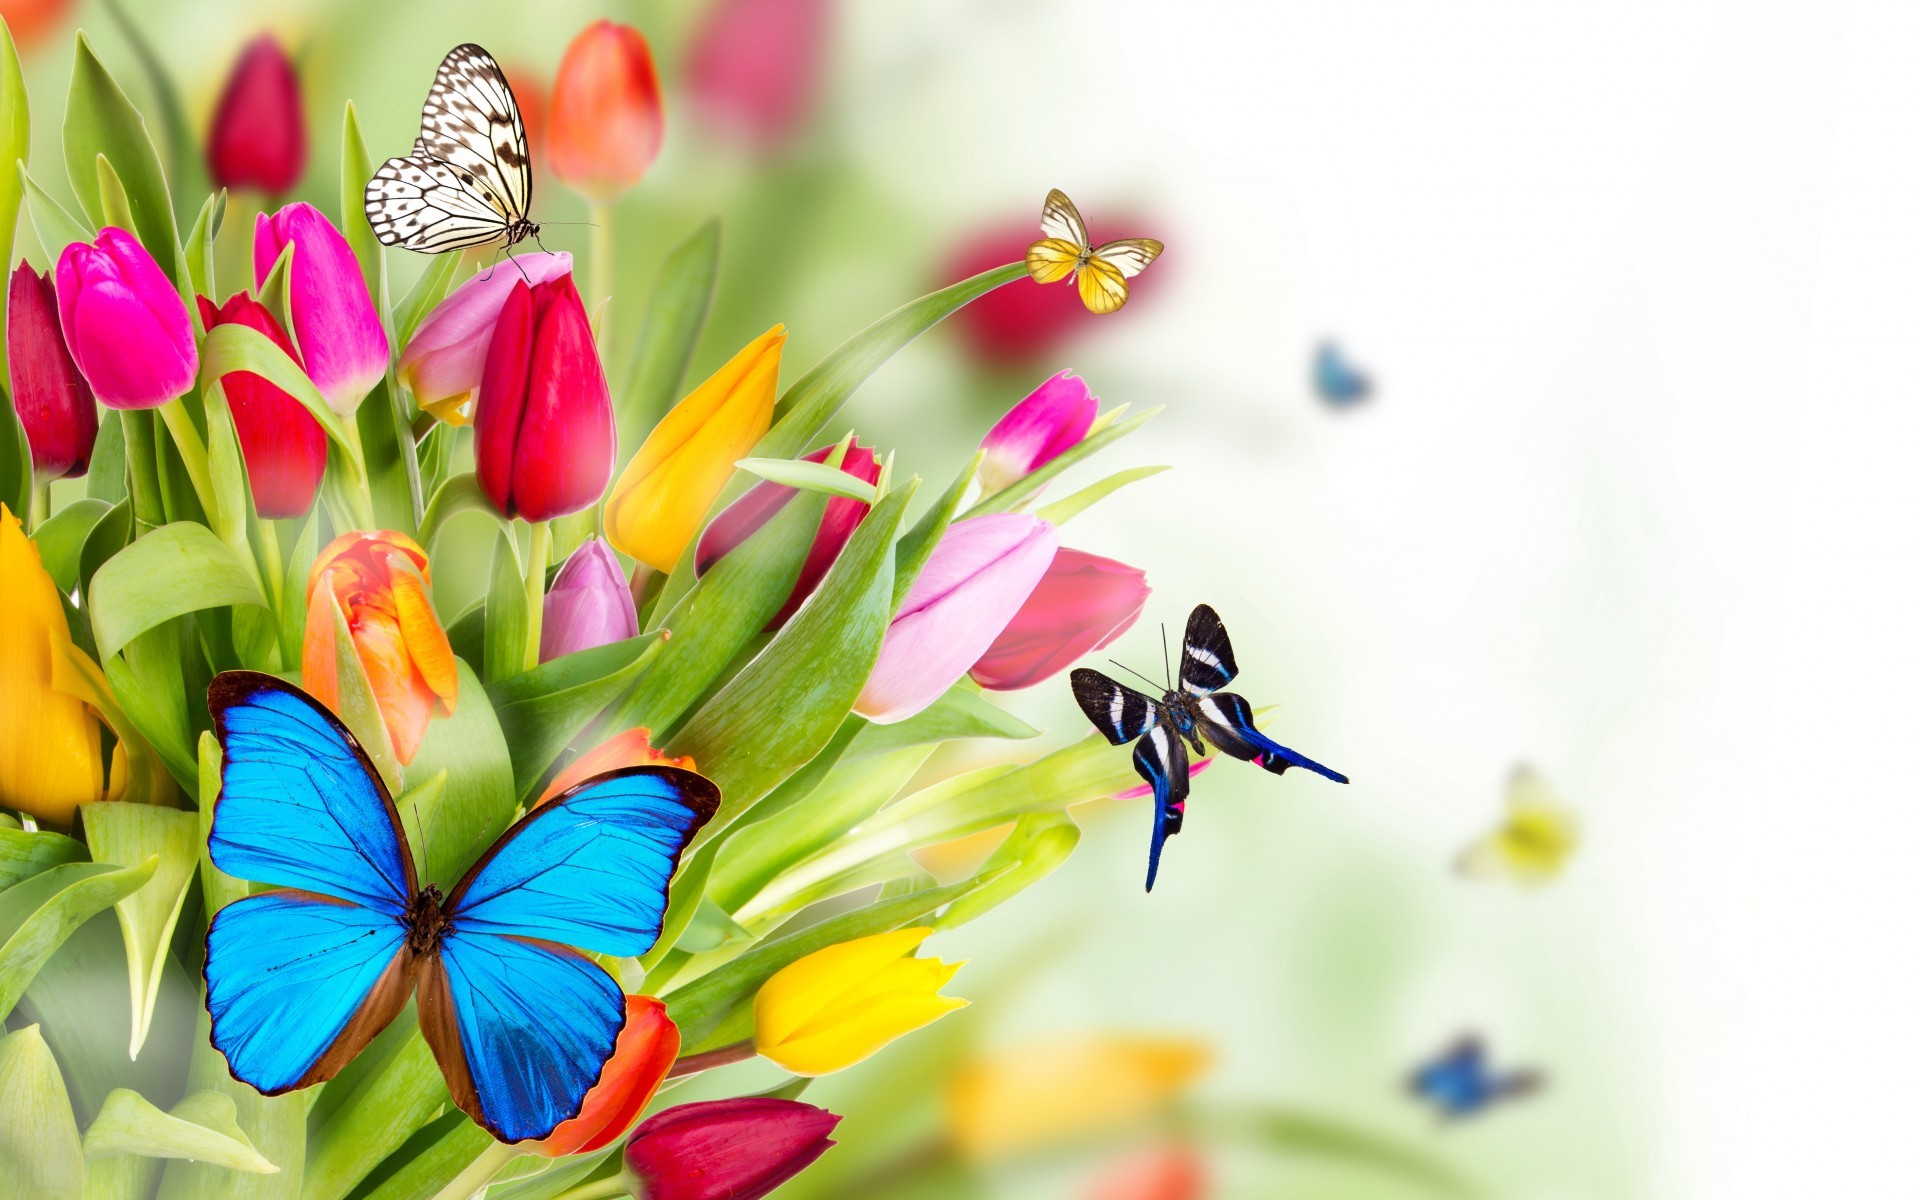 Spring Flowers Wallpapers Hd Pictures One Hd Wallpaper Pictures 1920x1200